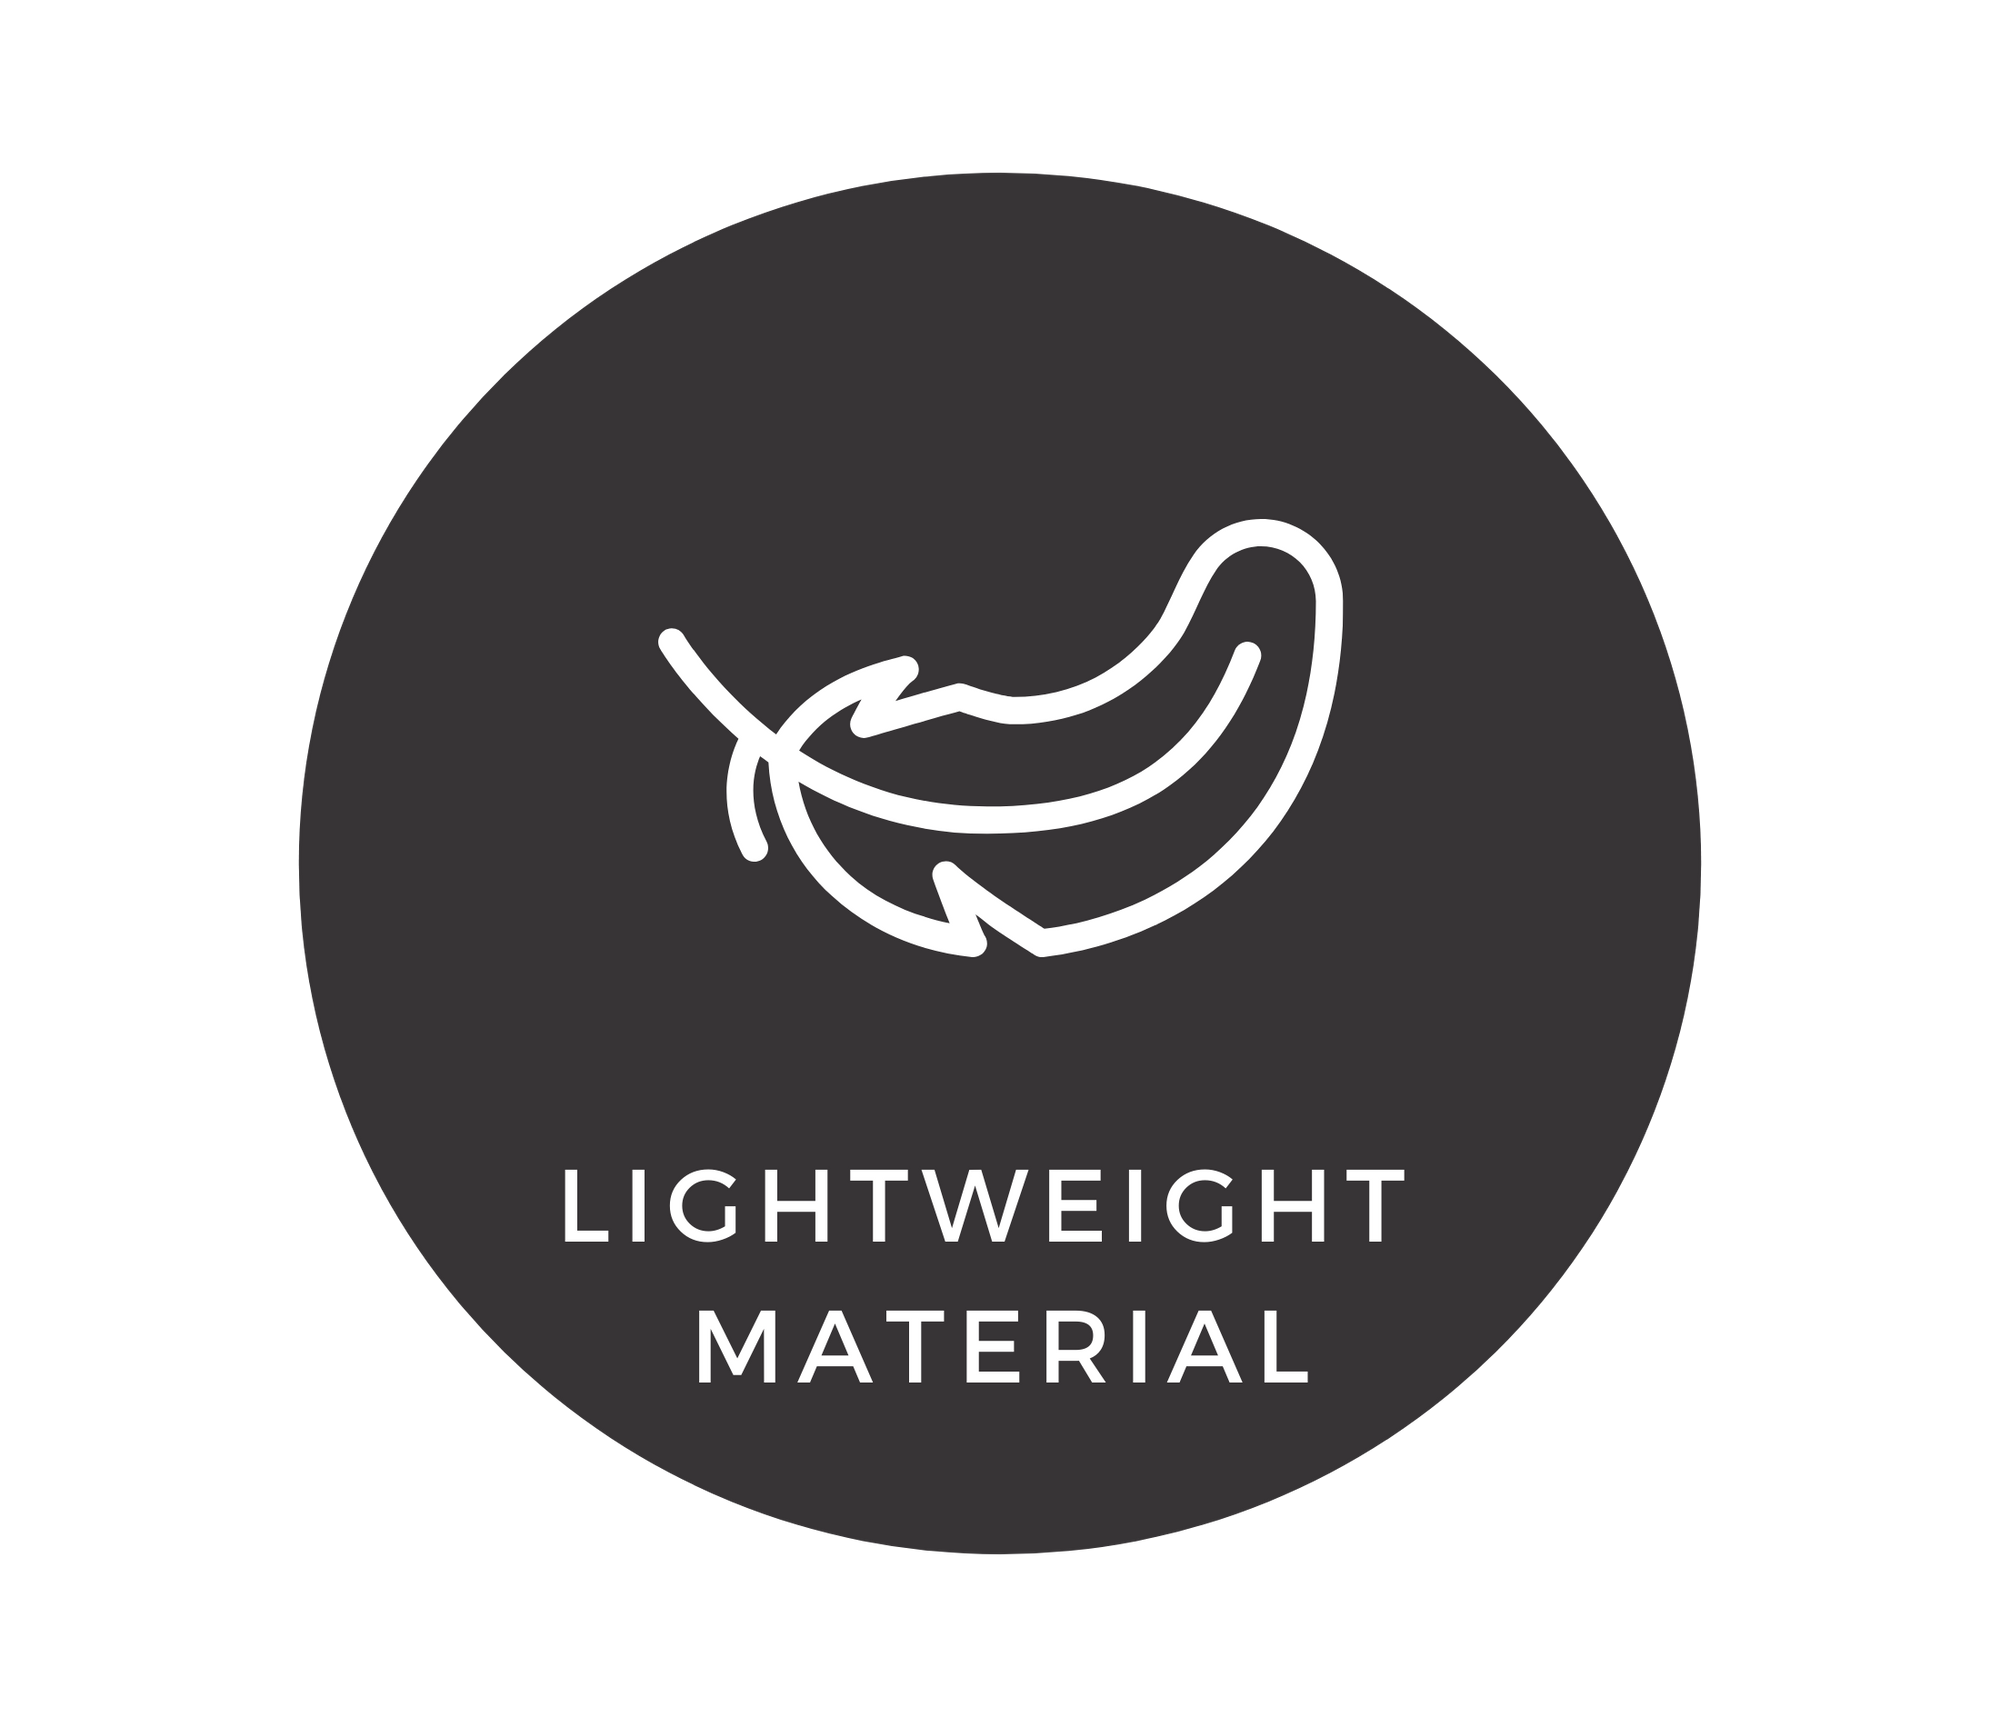 Light weight material icon